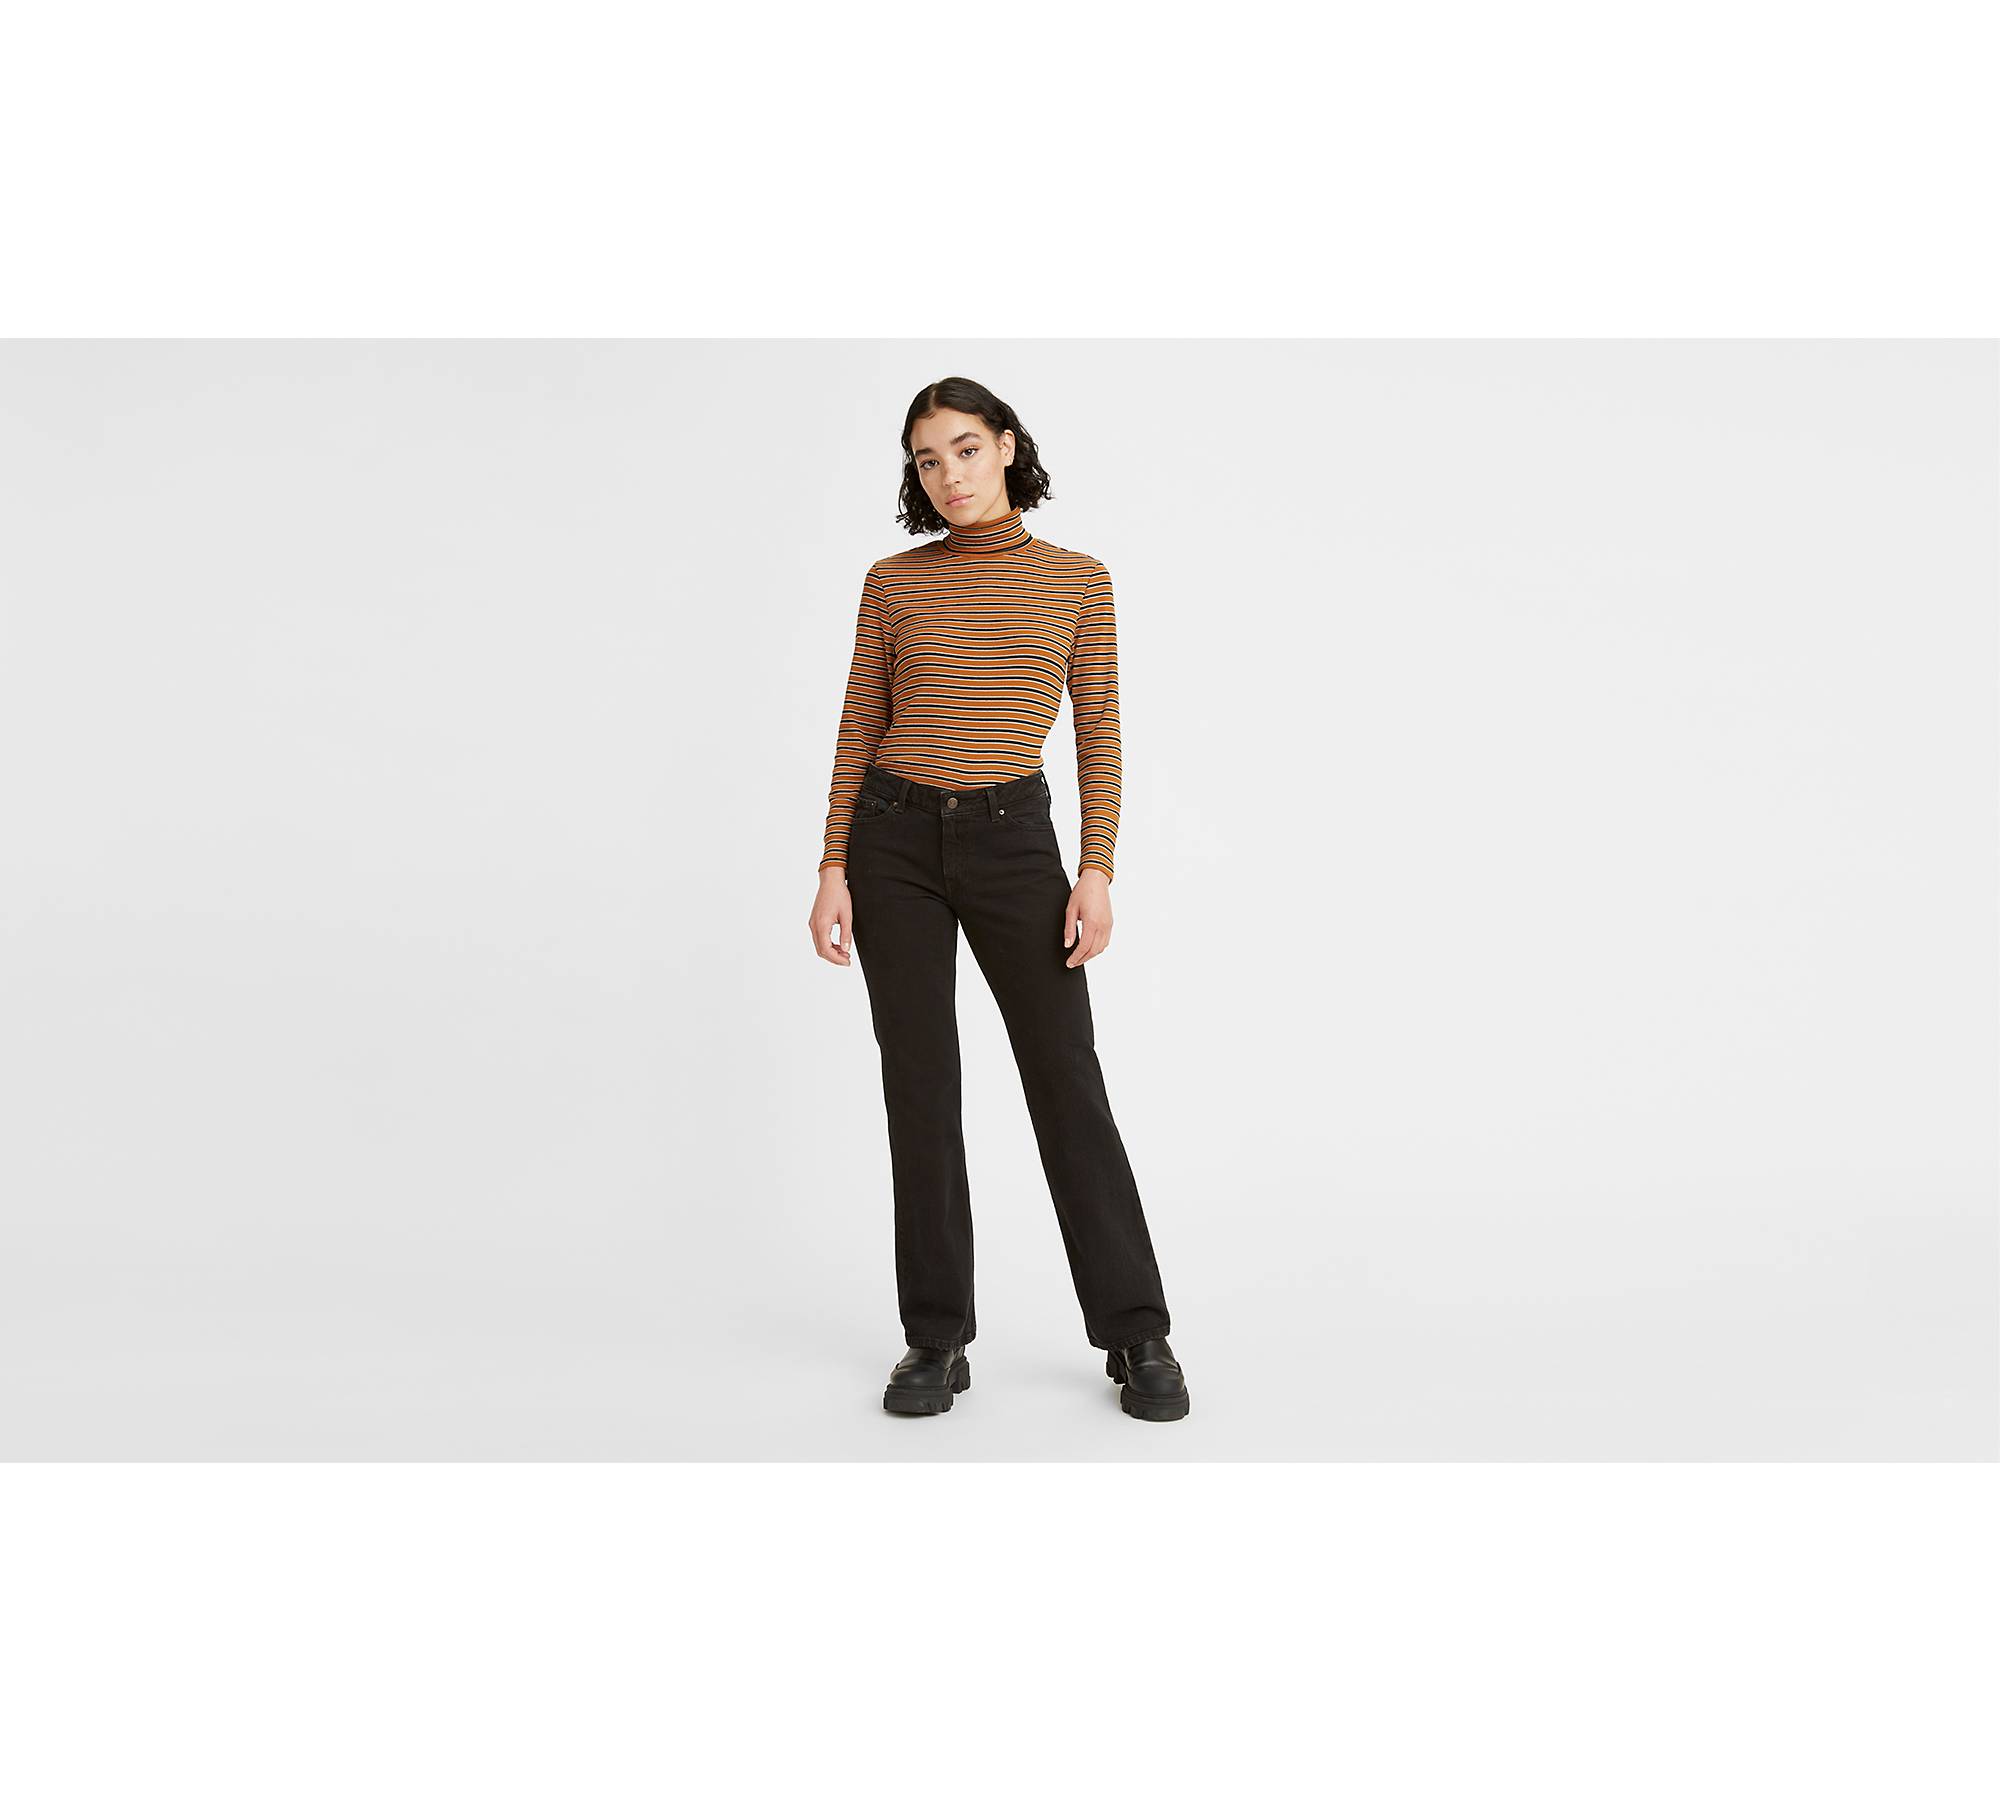 Low Pitch Bootcut Women's Jeans - Dark Wash | Levi's® US